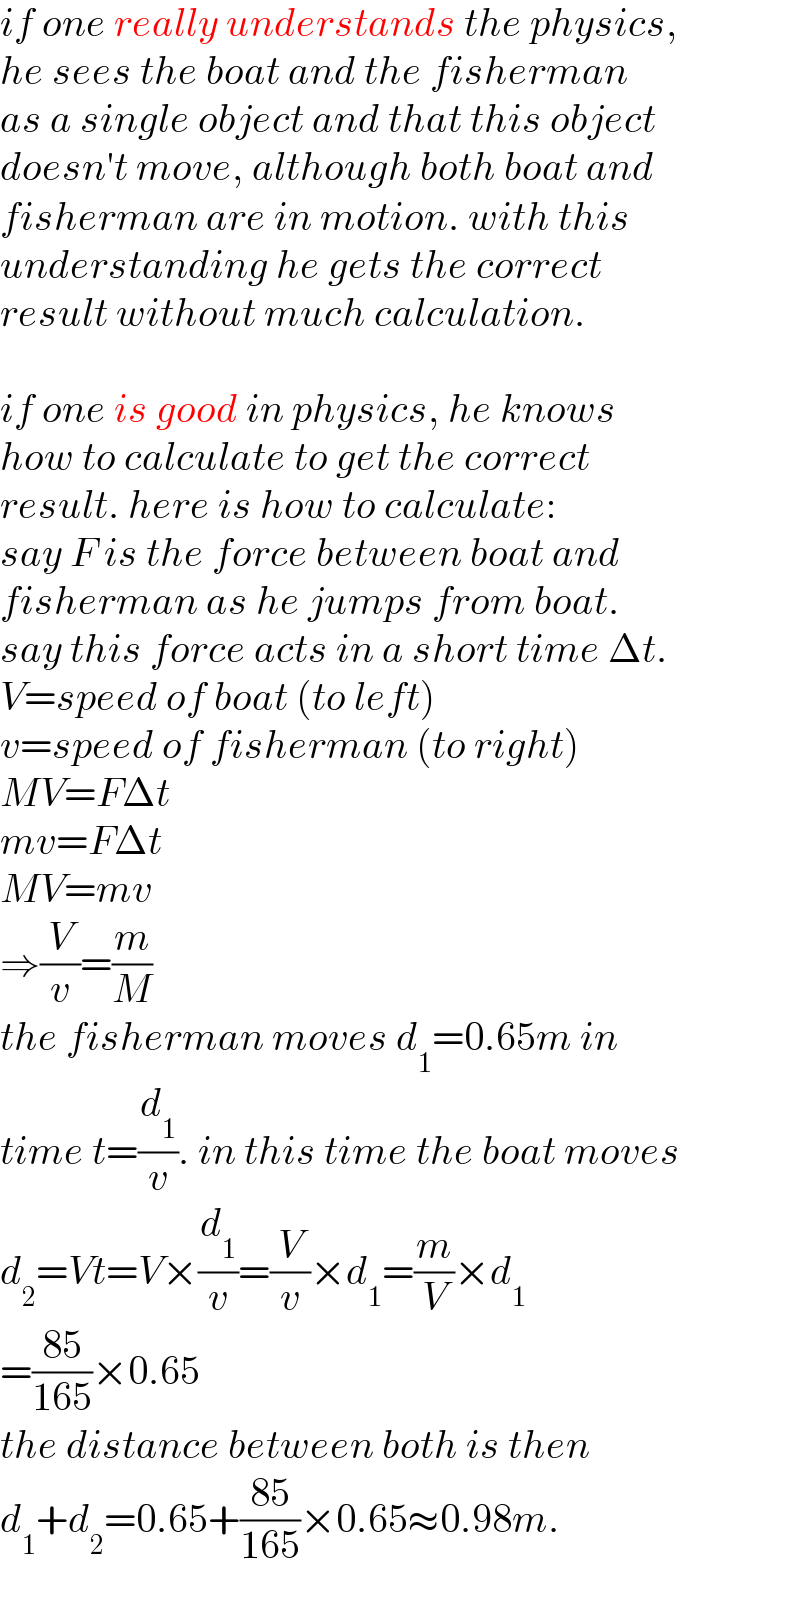 if one really understands the physics,  he sees the boat and the fisherman  as a single object and that this object  doesn′t move, although both boat and  fisherman are in motion. with this  understanding he gets the correct  result without much calculation.    if one is good in physics, he knows  how to calculate to get the correct  result. here is how to calculate:  say F is the force between boat and  fisherman as he jumps from boat.  say this force acts in a short time Δt.  V=speed of boat (to left)  v=speed of fisherman (to right)  MV=FΔt  mv=FΔt  MV=mv  ⇒(V/v)=(m/M)  the fisherman moves d_1 =0.65m in  time t=(d_1 /v). in this time the boat moves  d_2 =Vt=V×(d_1 /v)=(V/v)×d_1 =(m/V)×d_1   =((85)/(165))×0.65  the distance between both is then  d_1 +d_2 =0.65+((85)/(165))×0.65≈0.98m.  